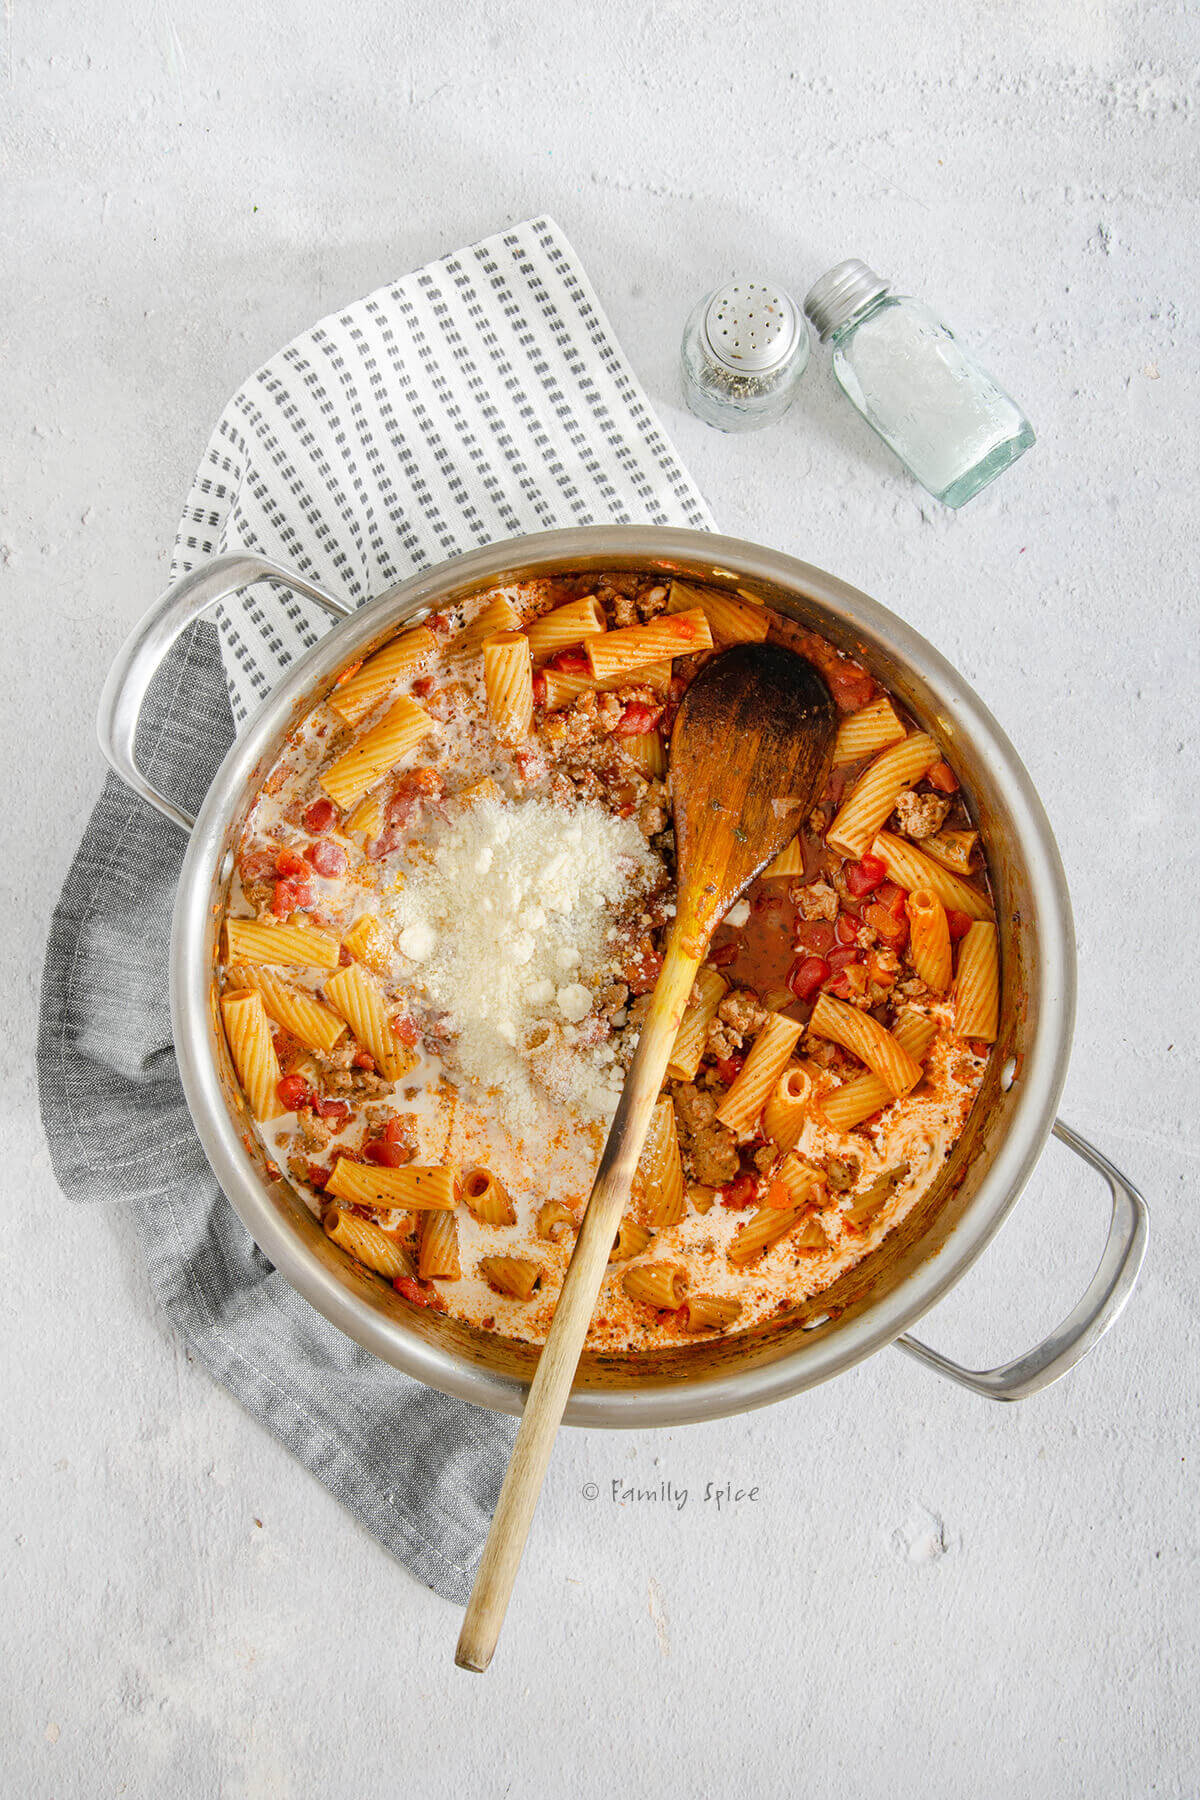 Grated parmesan and cream added to bolognese sauce with partially cooked rigatoni in a stainless pot